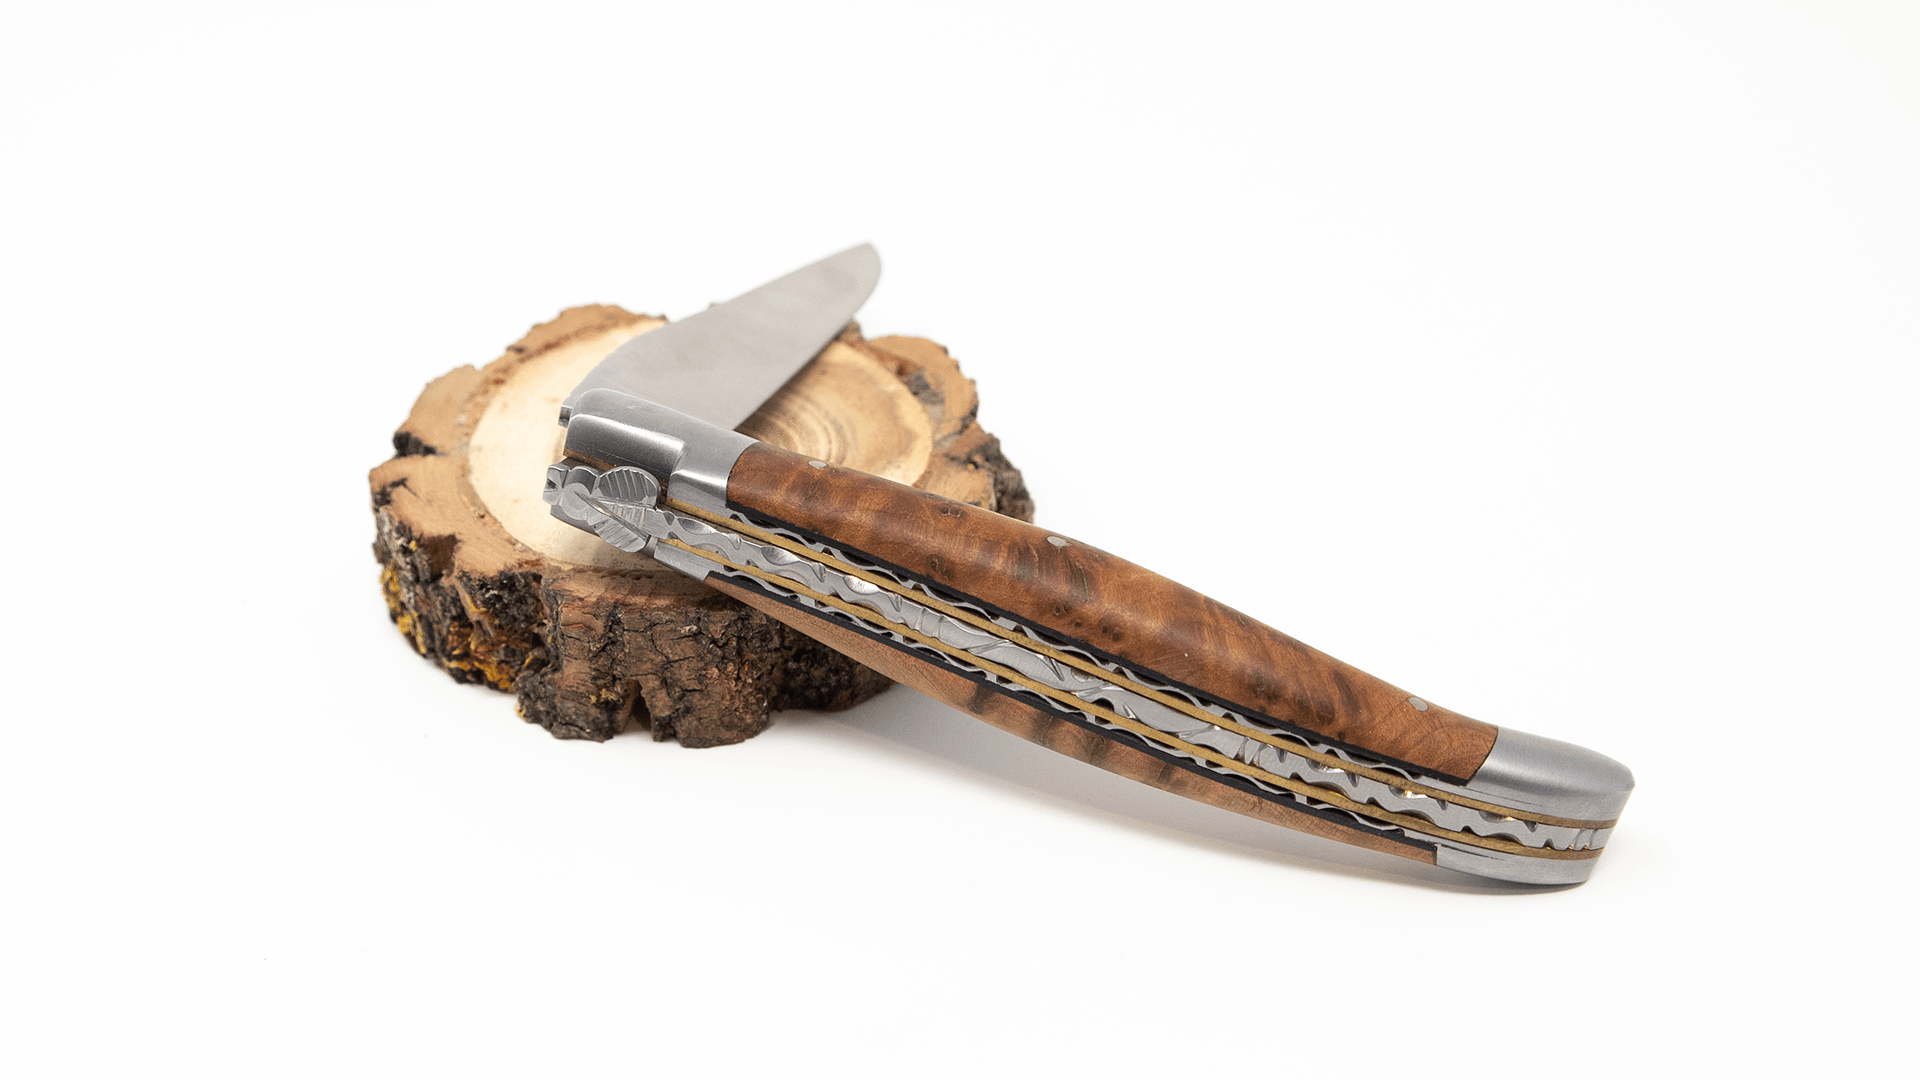 The history of the Laguiole knife - Tourism in Aubrac